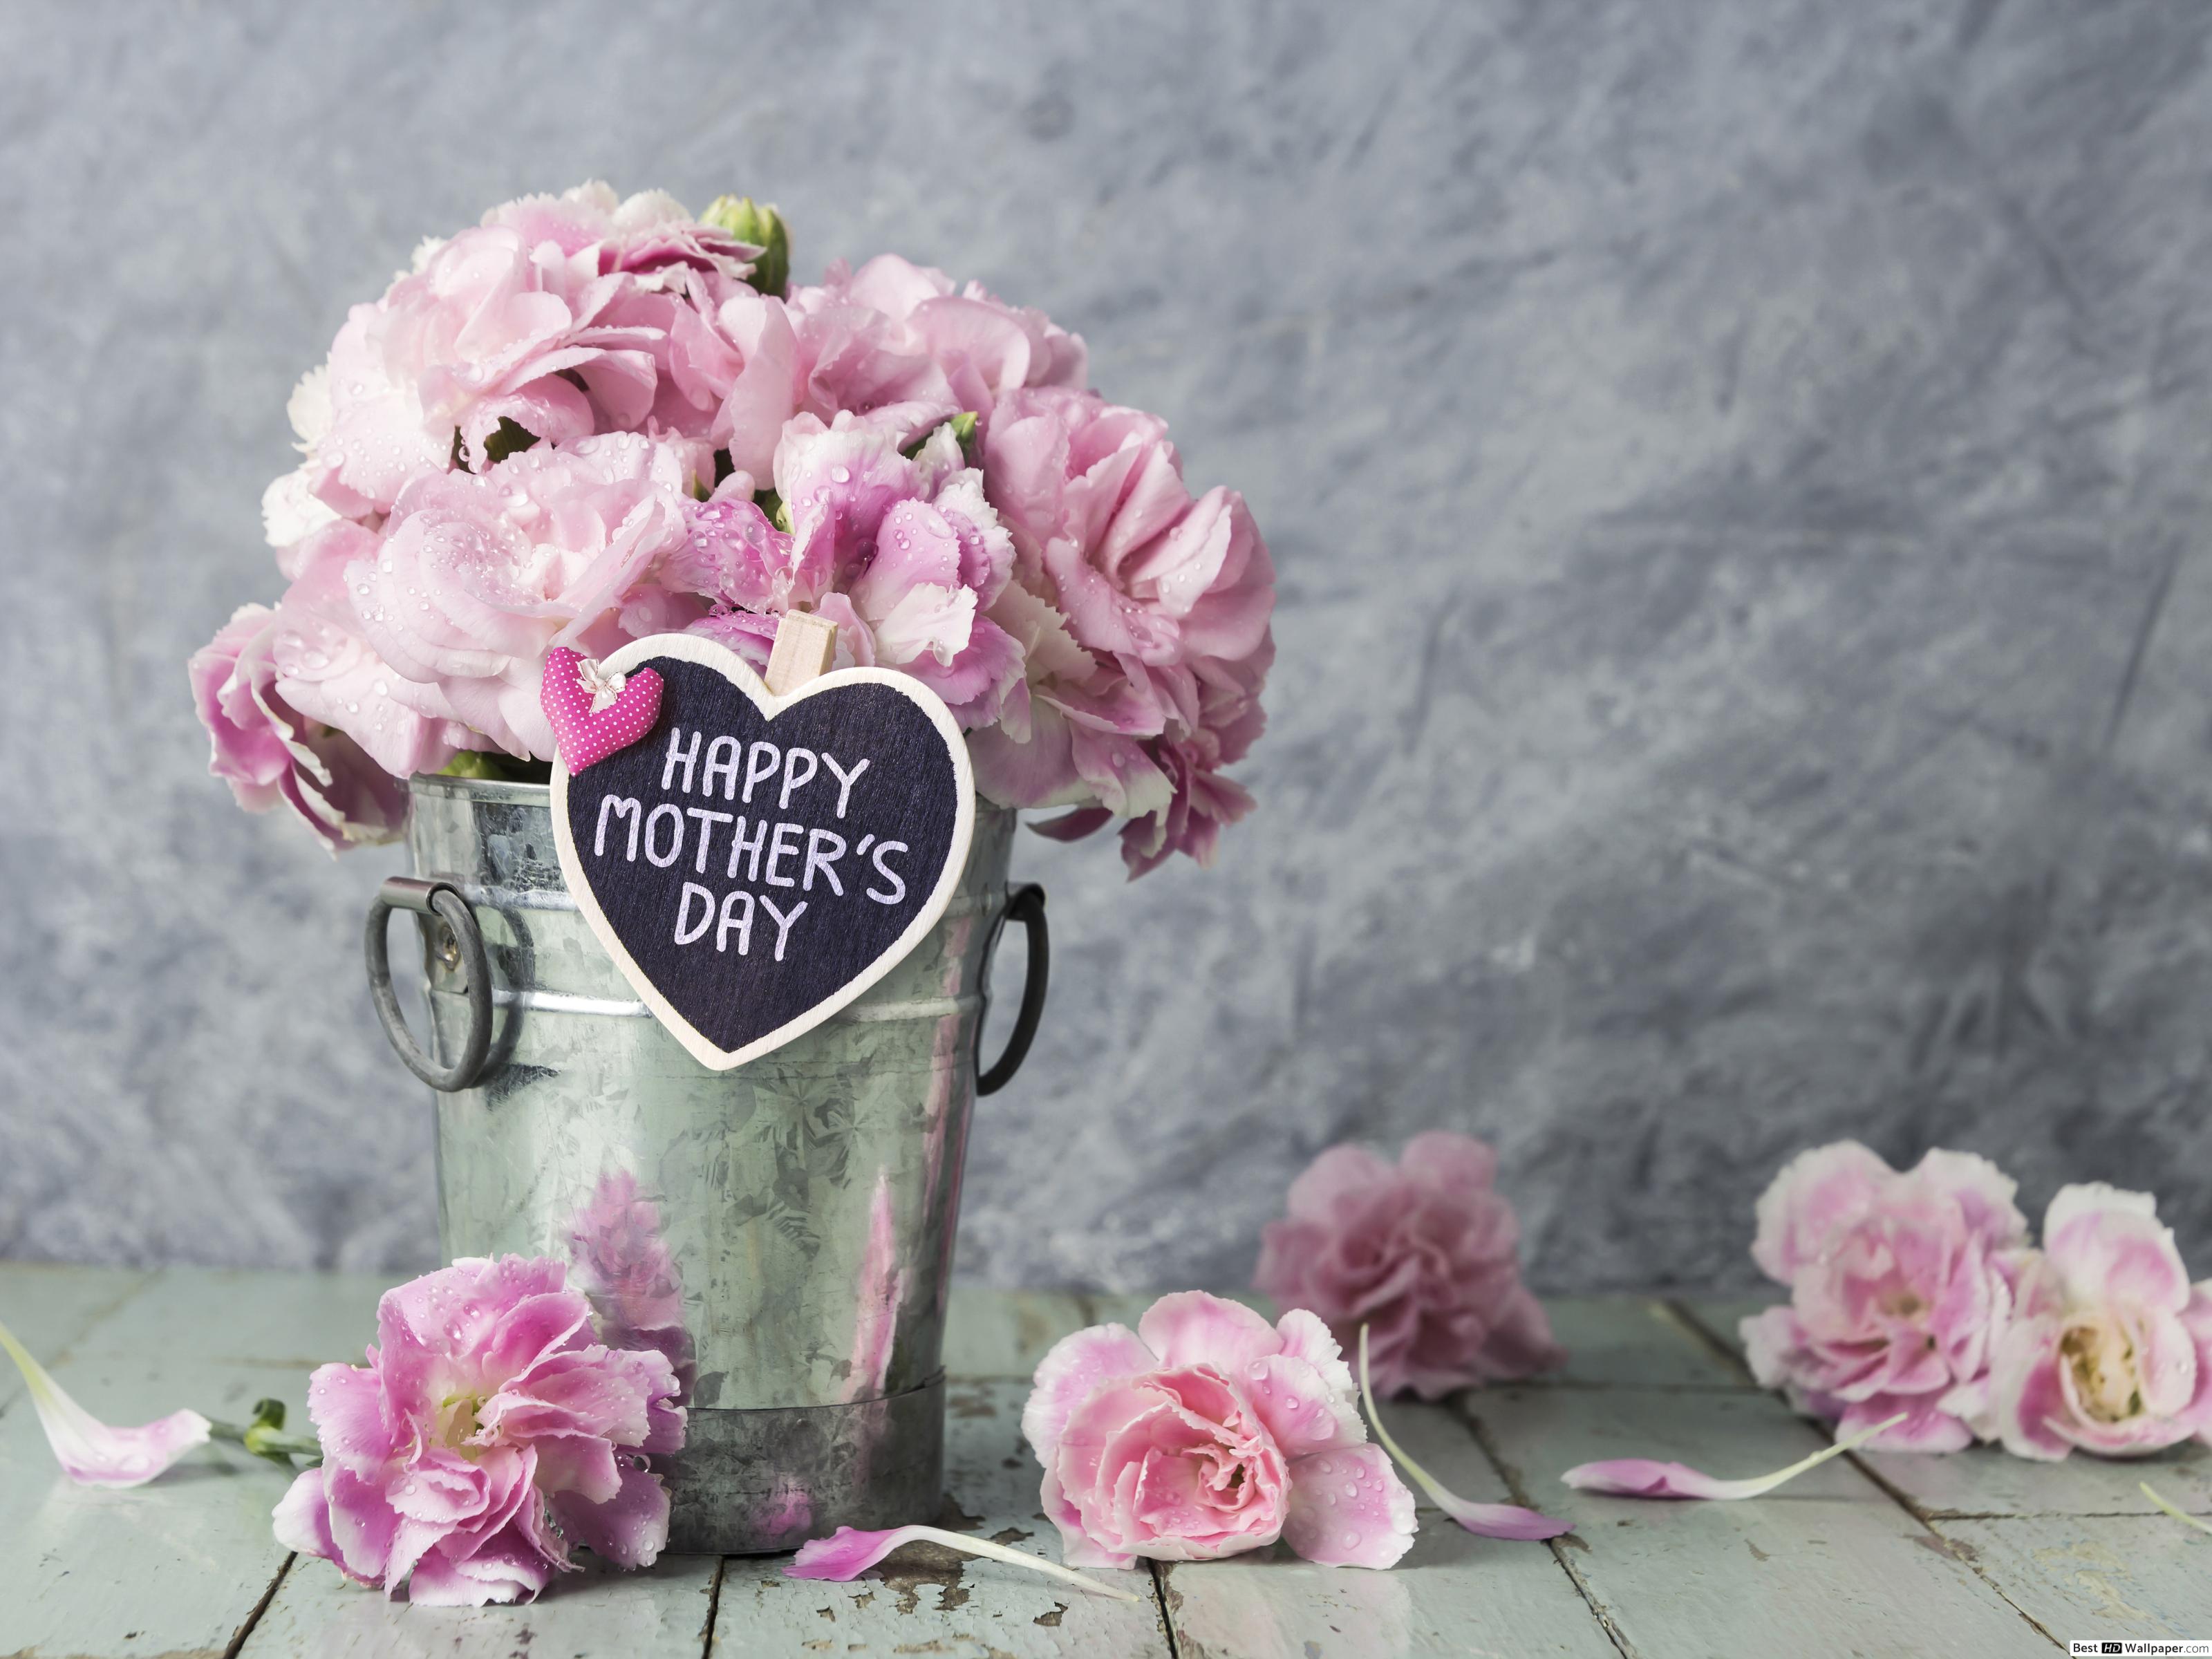 Happy Mother's Day Note and Gift Rose in Bucket HD wallpaper download